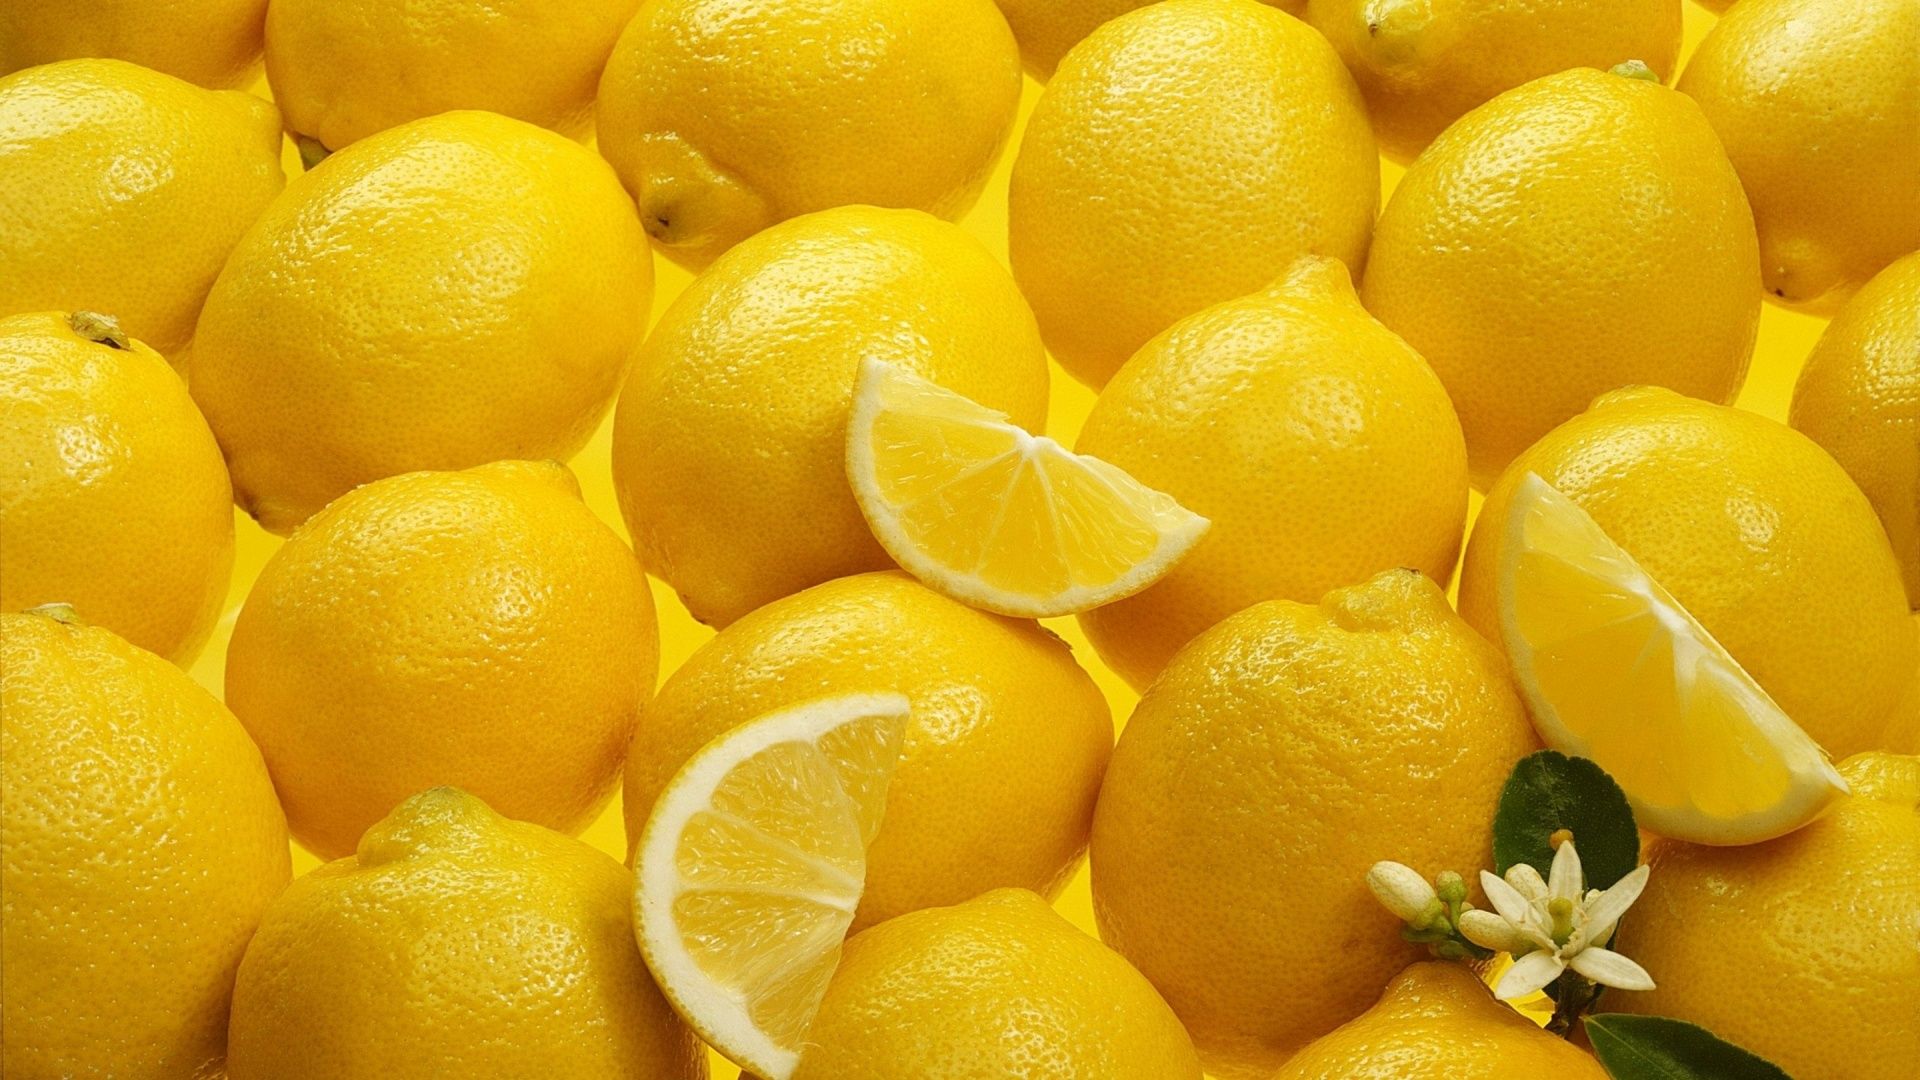 Free download 45 Uses For Lemons That Will Blow Your Socks Off Educate Inspire [1920x1080] for your Desktop, Mobile & Tablet. Explore Lemon Wallpaper Kitchen. The Gaming Lemon Wallpaper, Lemon Pattern Wallpaper